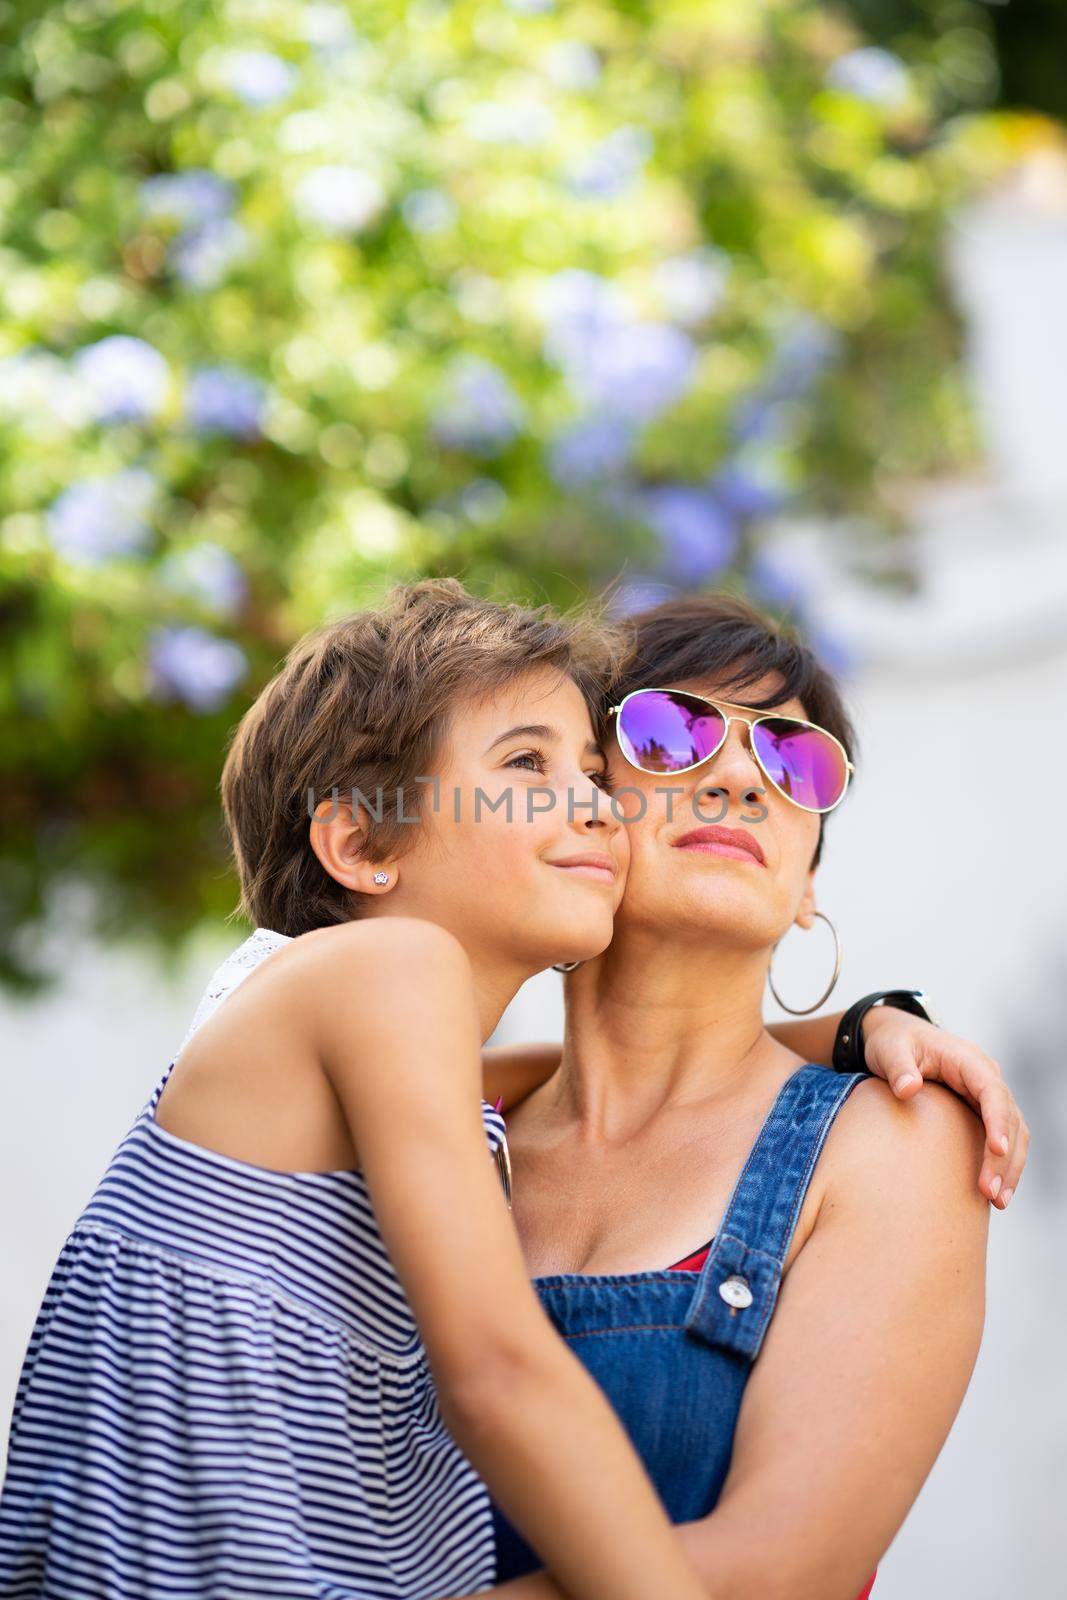 Mother and her little daughter traveling together in urban background. Women wearing sunglasses.